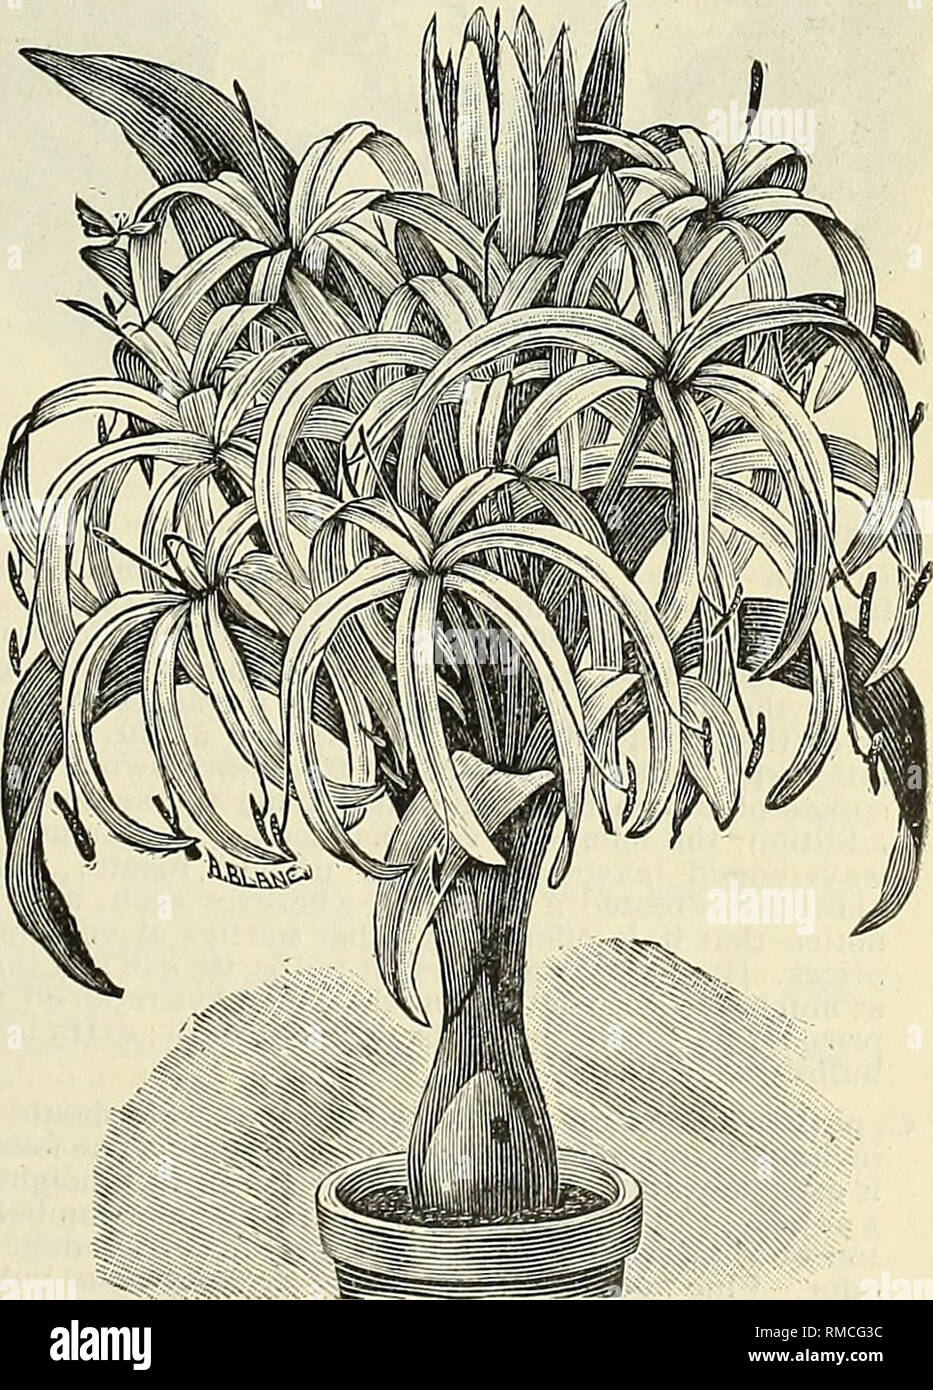 . Annual illustrated and descriptive catalogue of new, rare and beautiful plants and seeds. Nurseries (Horticulture) Florida Catalogs; Plants, Ornamental Catalogs; Flowers Catalogs; Tropical plants Catalogs; Fruit trees Seedlings Catalogs. CRINUM NOBILE. COOPERIA, or GIANT FAIRY LILIES. These charming summer-blooming bulbs are closely uillied to the Zephyrantlies, but have a very distinct ap- pearance. The}' produce their beautiful, primrose- scented, lily-like white flowers on stems 10 to 15 inches tall, and are remarkable in the Amaryllis family for open 1 ing their flowers first during the  Stock Photo